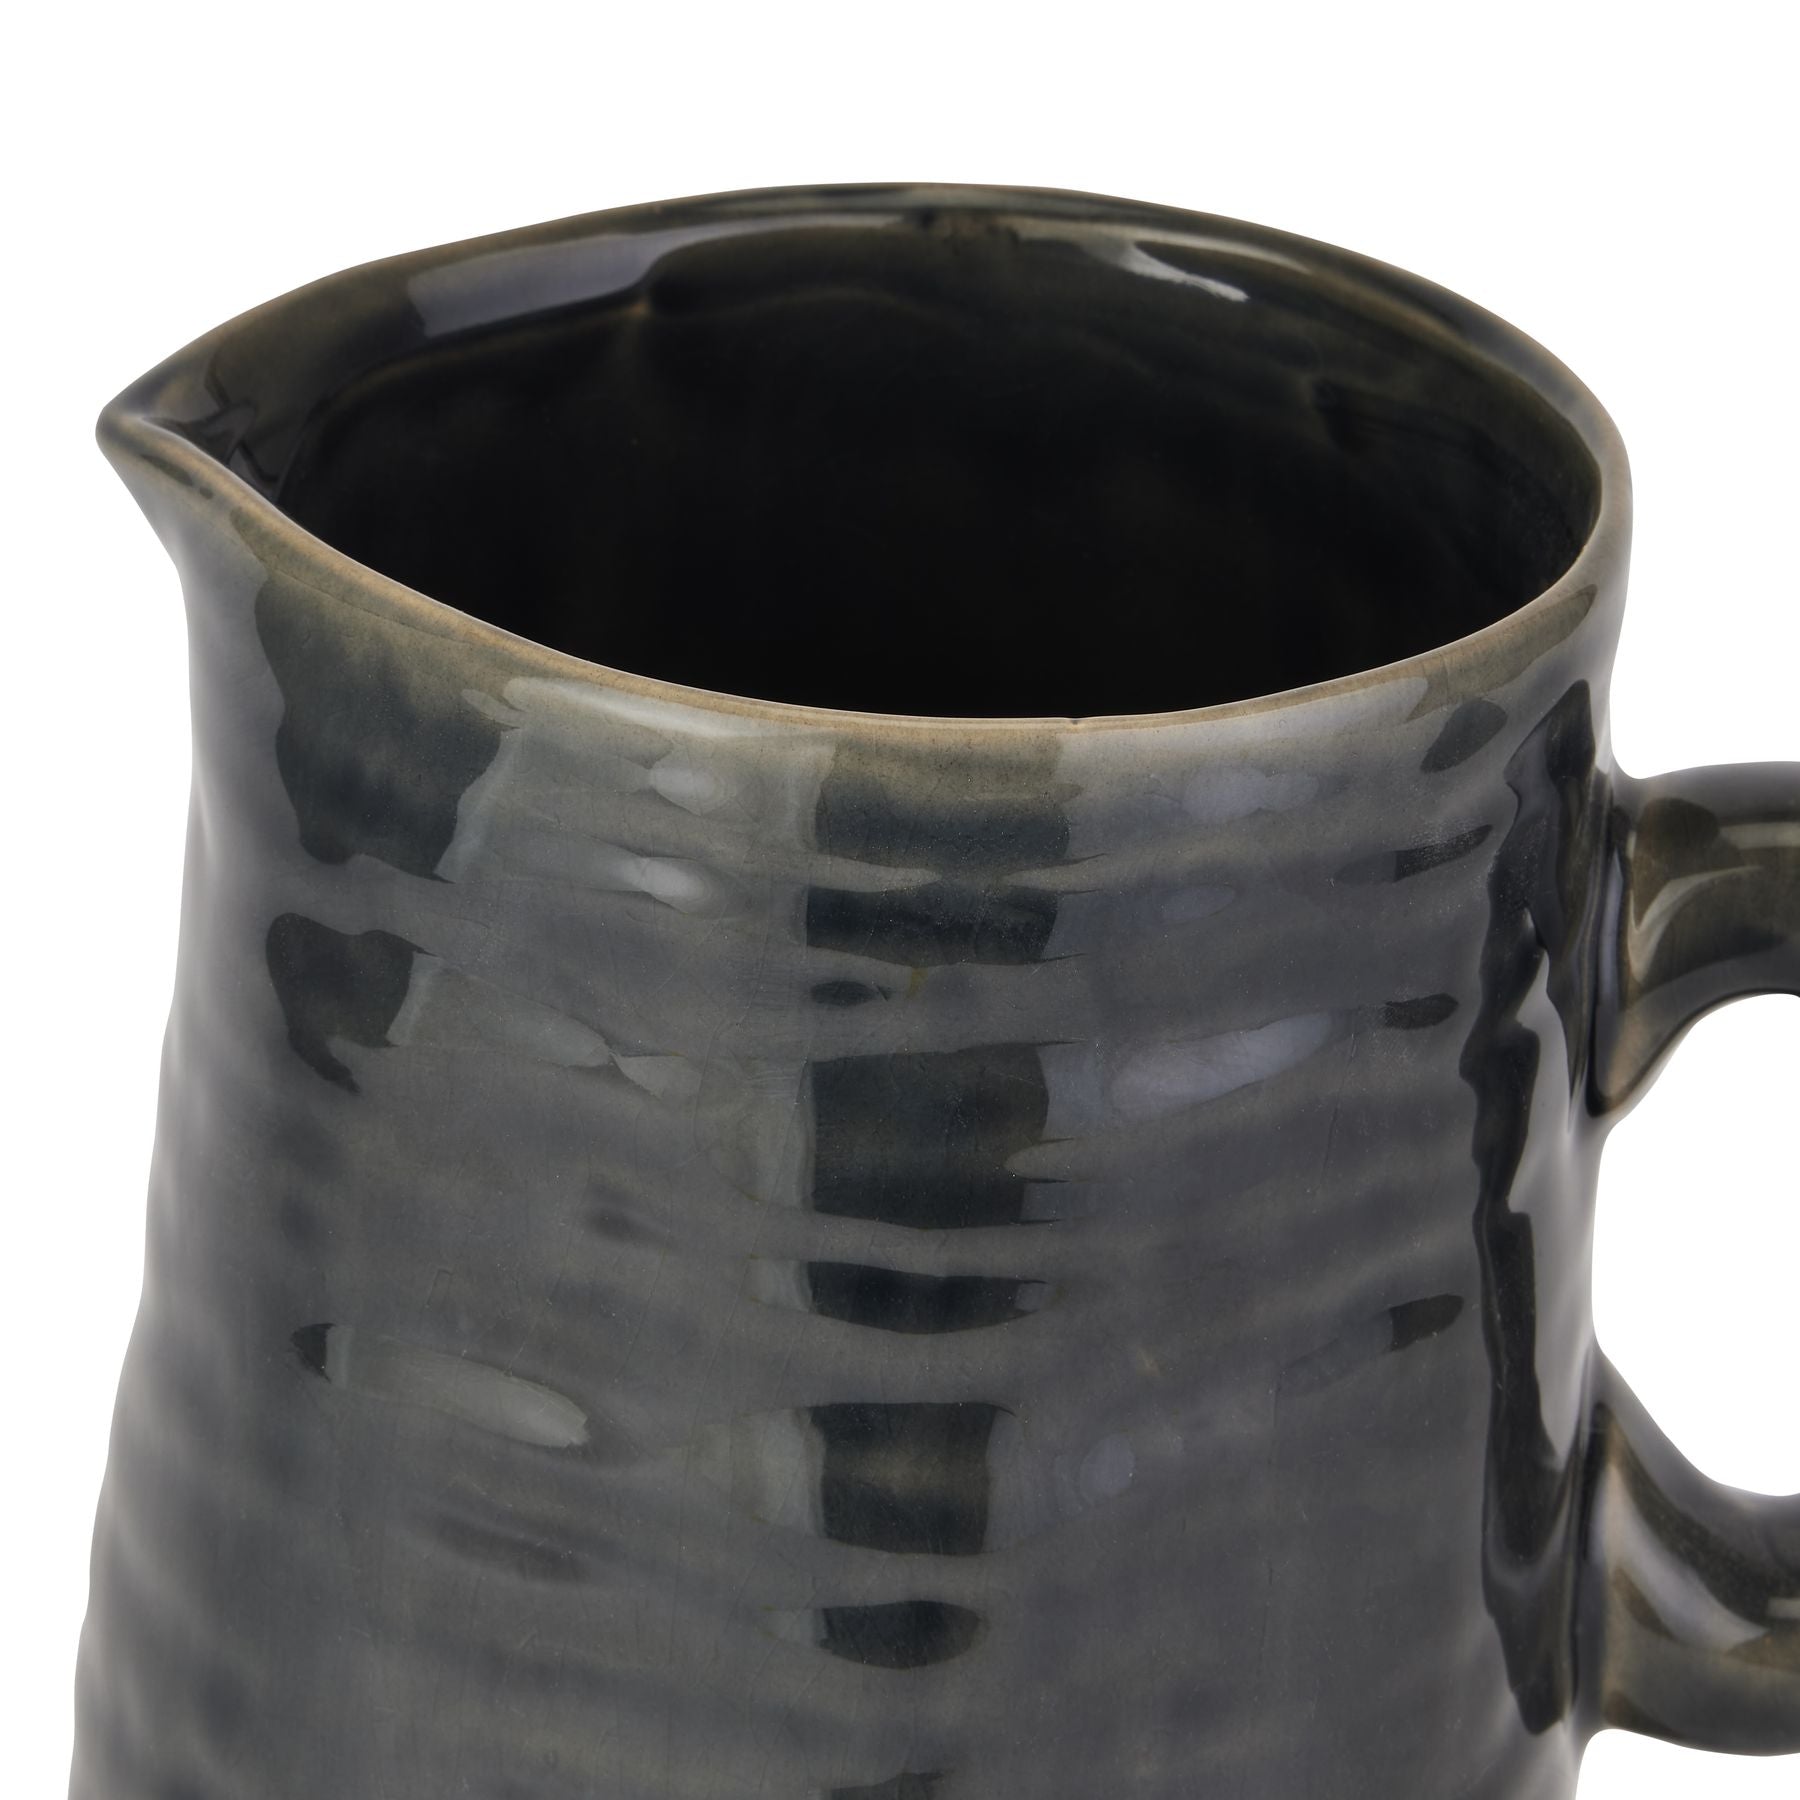 Seville Collection Navy Jug